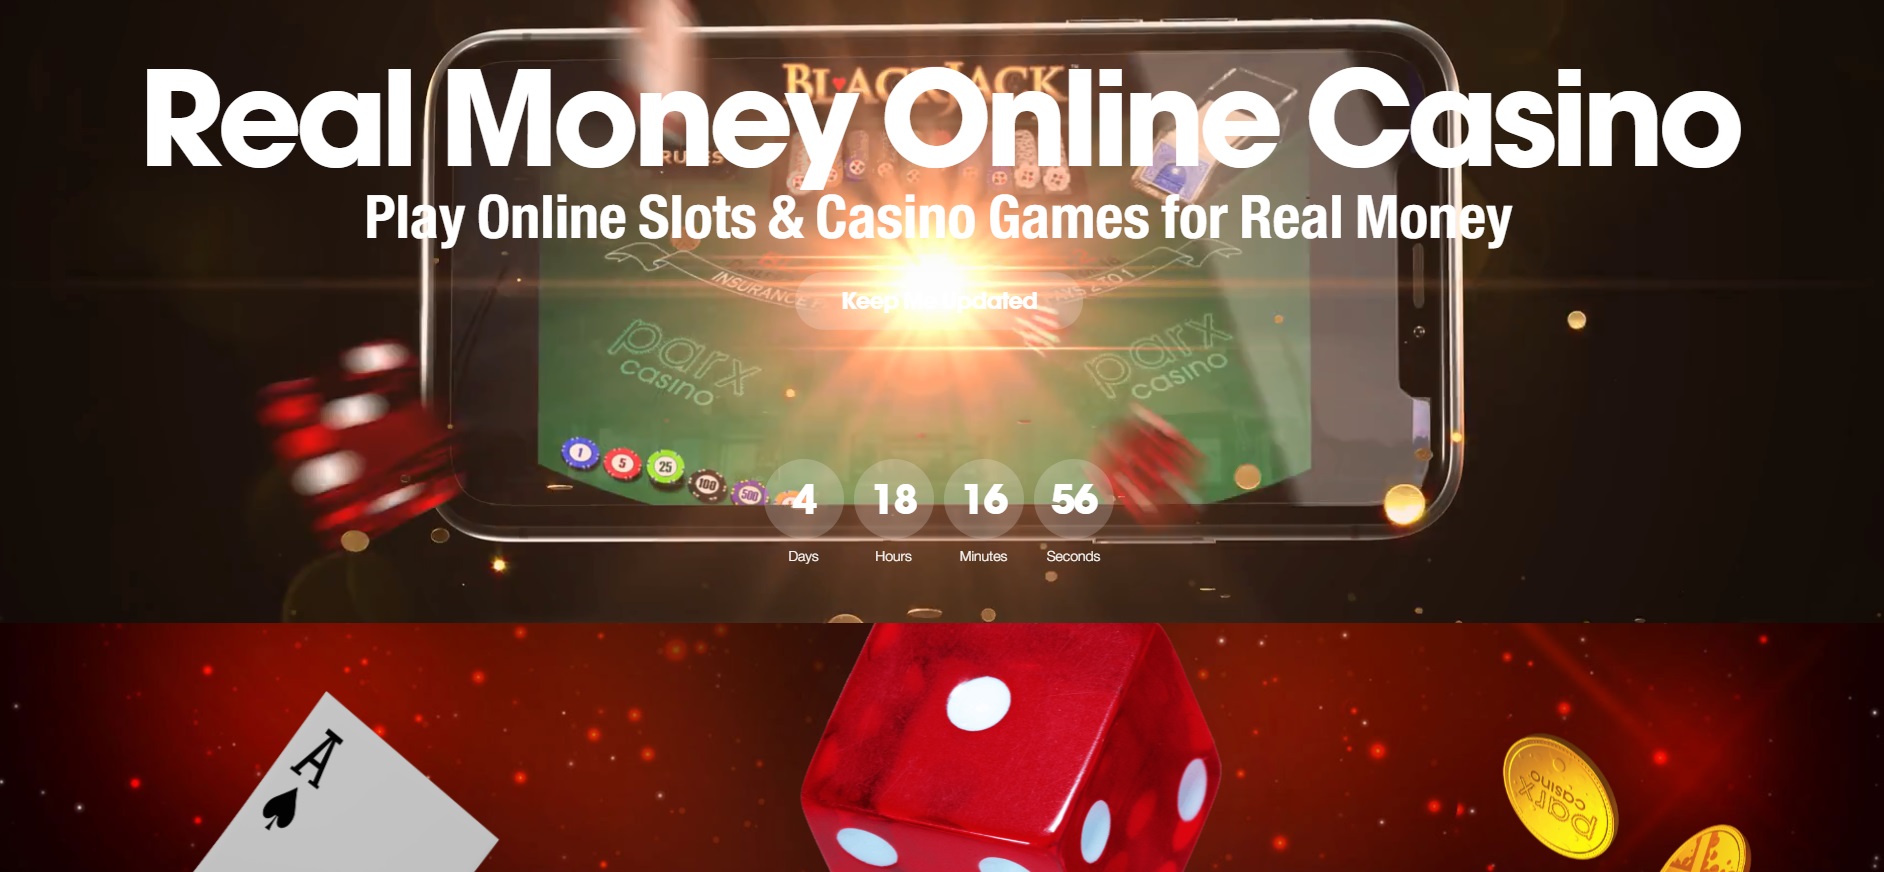 Pennsylvania Online Gambling to Launch on Monday, But Poker May Have to Wait